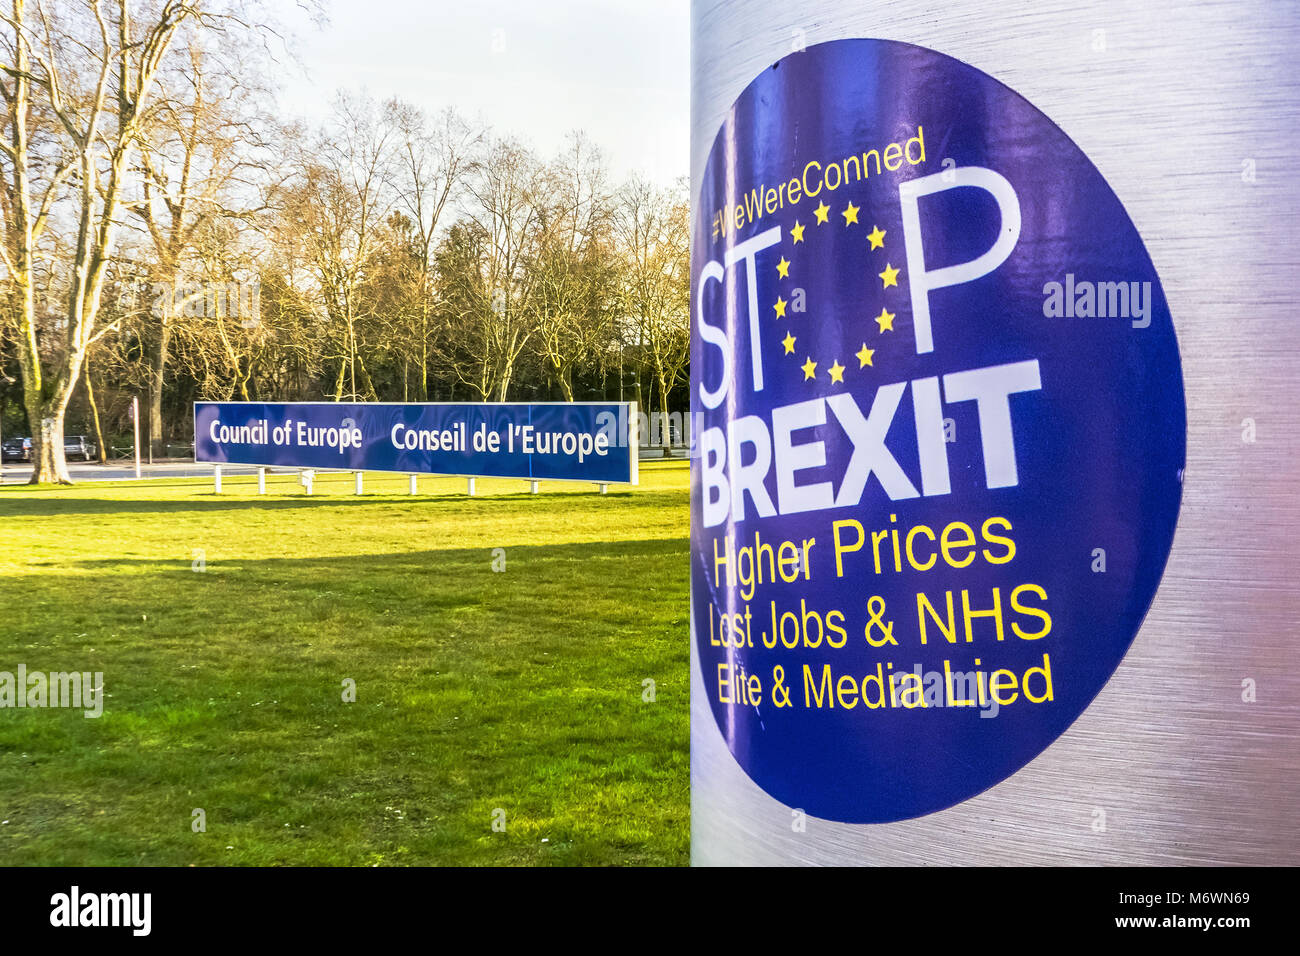 Anti-Brexit sticker on the UK flag pole at the Council of Europe located in Strasbourg, France. Stock Photo